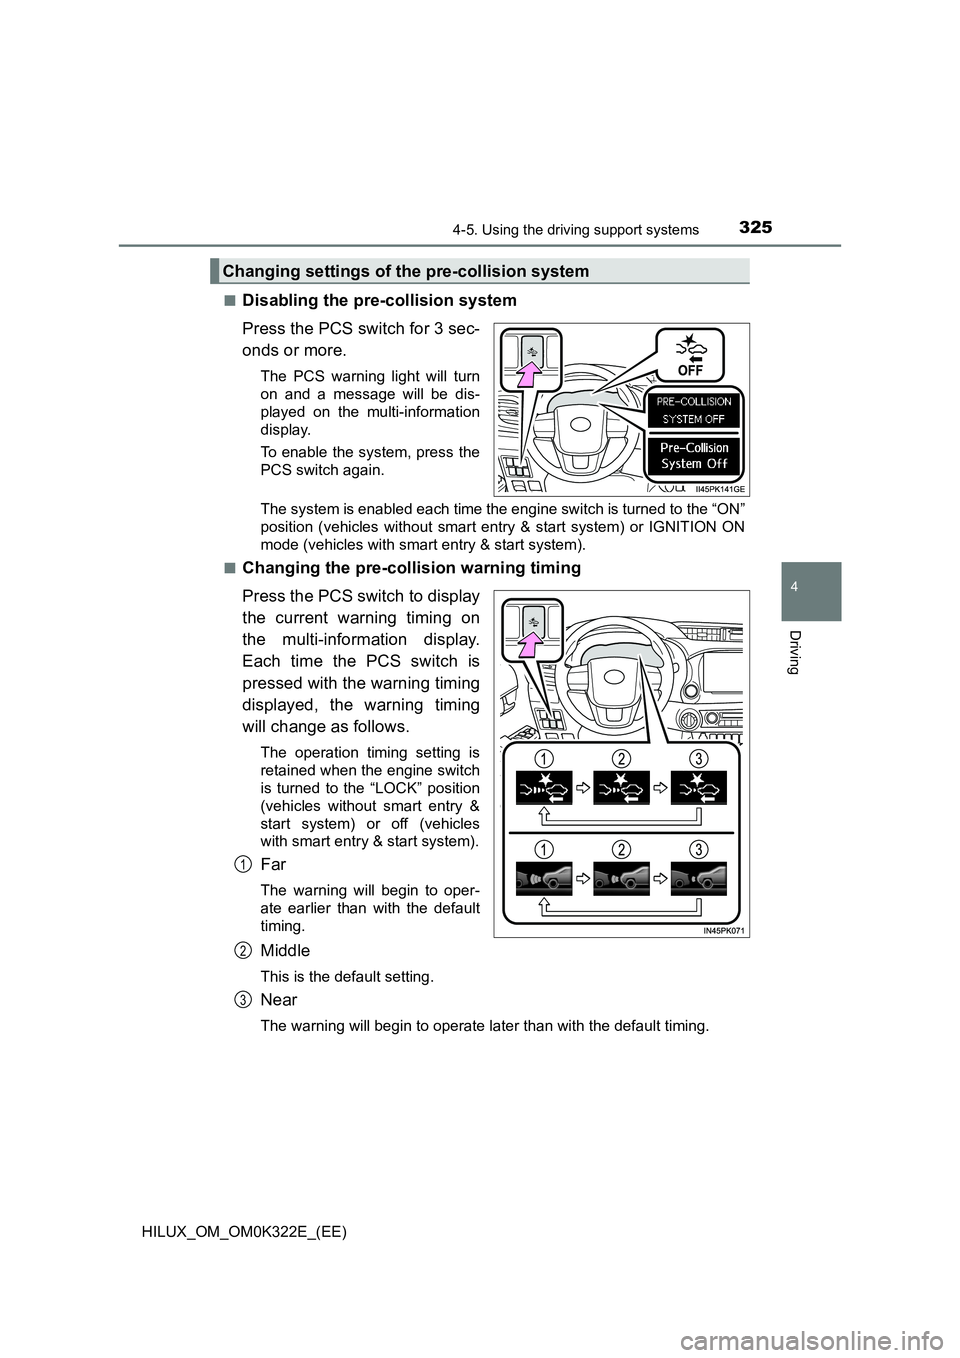 TOYOTA HILUX 2017  Owners Manual (in English) 3254-5. Using the driving support systems
4
Driving
HILUX_OM_OM0K322E_(EE) 
■Disabling the pre-collision system 
Press the PCS switch for 3 sec- 
onds or more.
The PCS warning light will turn 
on an